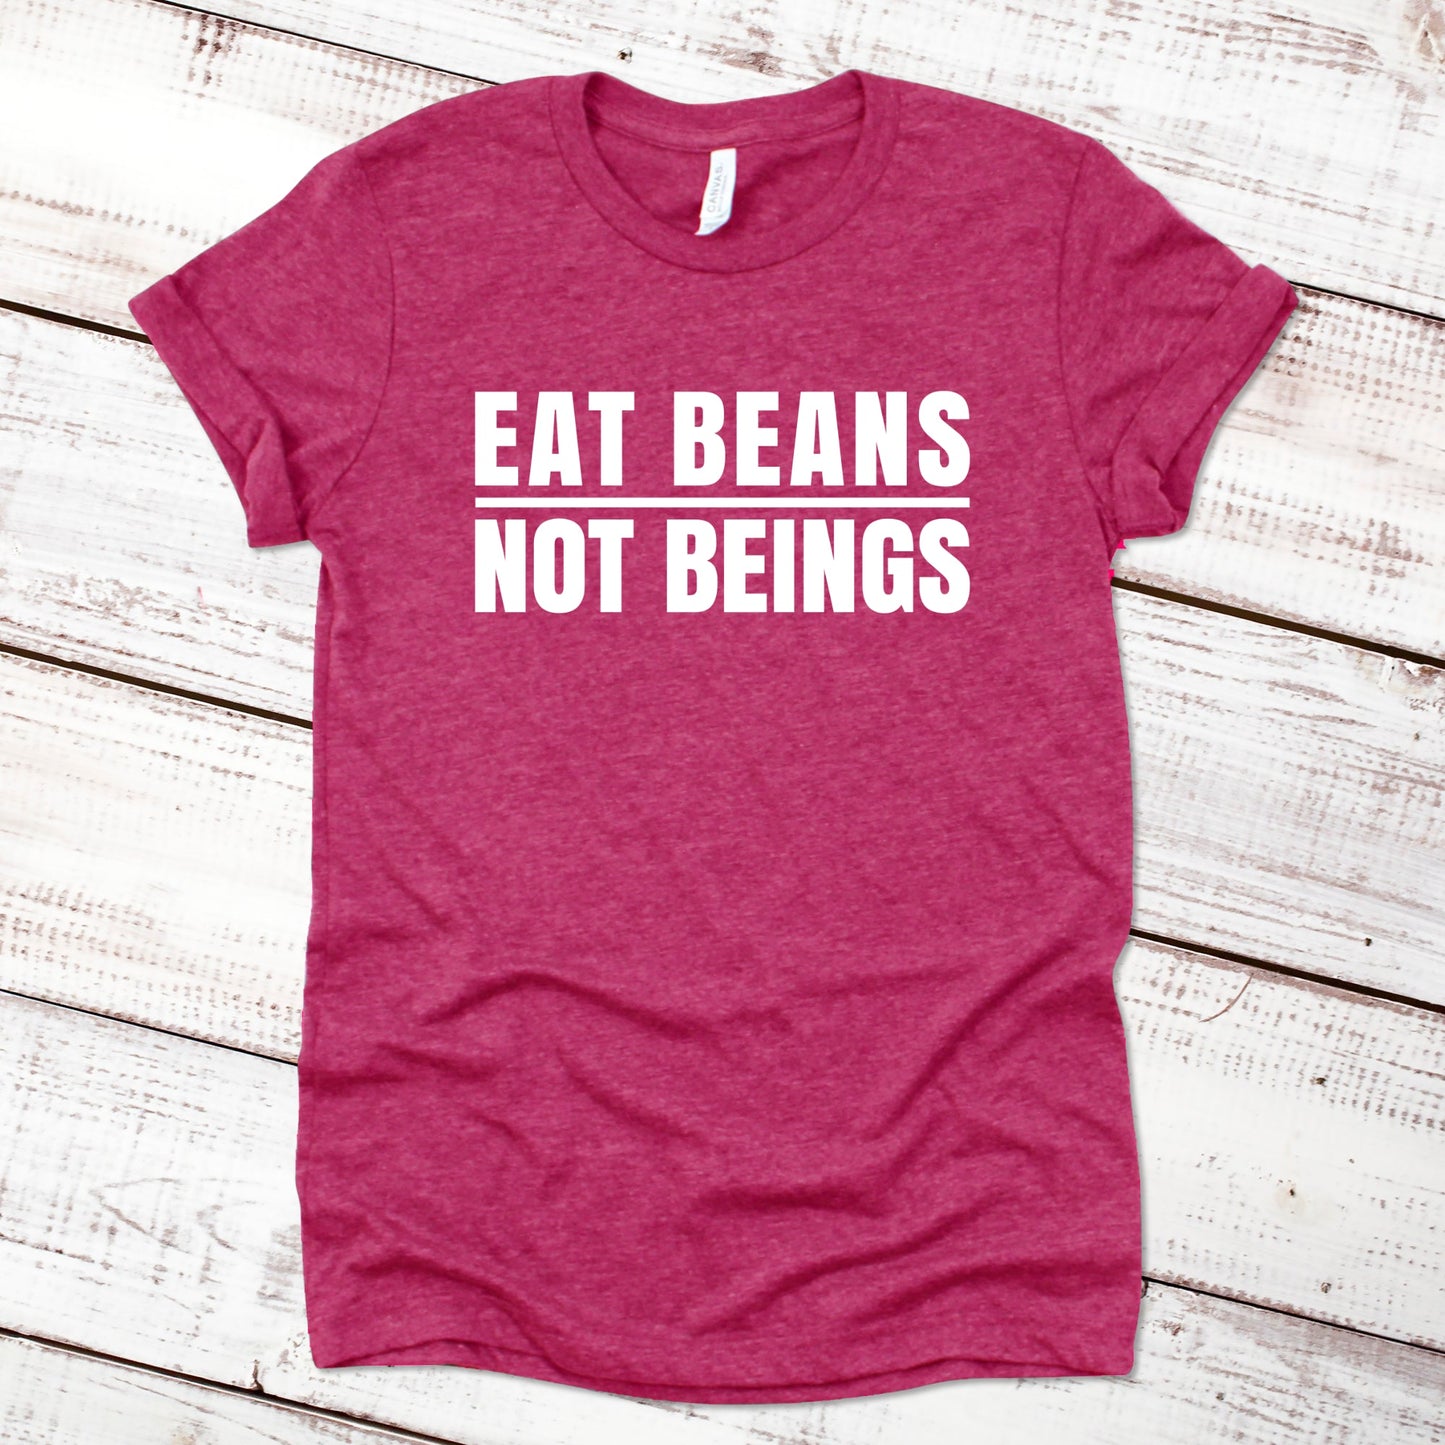 Eat Beans Not Beings Funny Shirt Great Giftables Heather Raspberry XS 